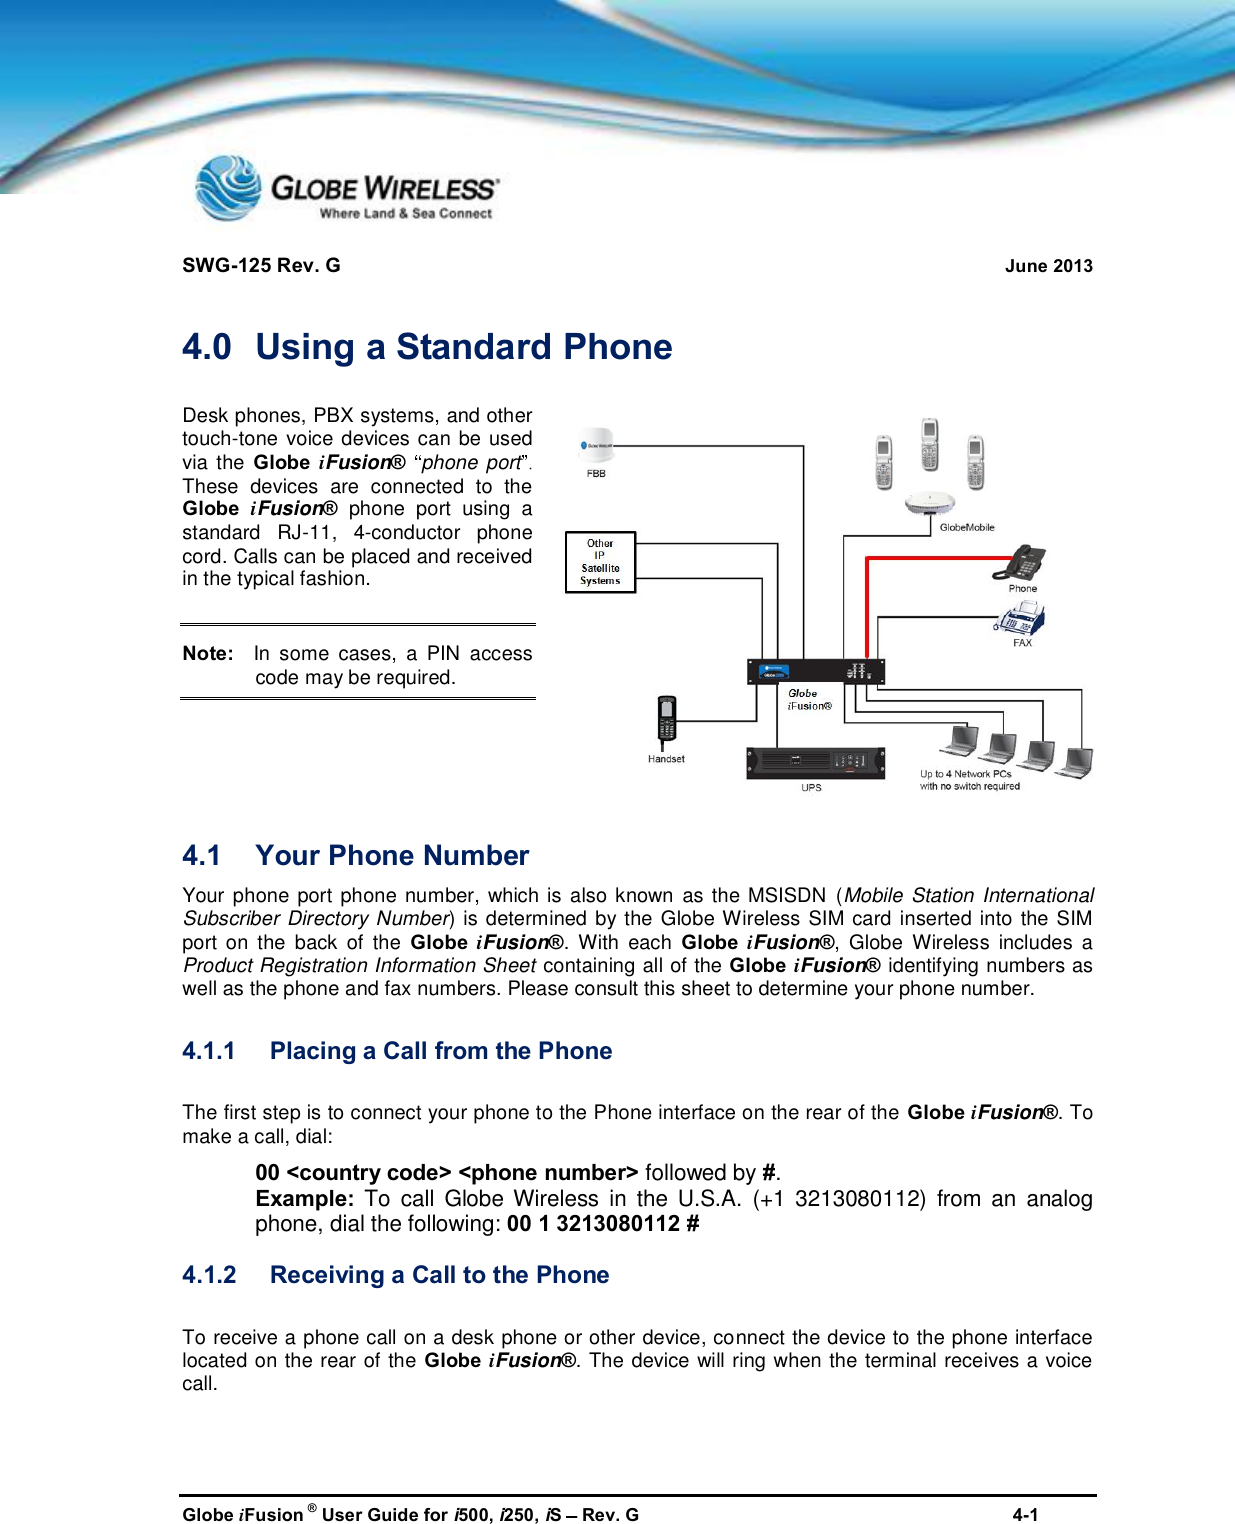 SWG-125 Rev. G June 2013Globe iFusion ®User Guide for i500, i250, iSRev. G 4-14.0 Using a Standard PhoneDesk phones, PBX systems, and othertouch-tone voice devices can be usedvia the Globe iFusion®phone portThese devices are connected to theGlobe iFusion®phone port using astandard RJ-11, 4-conductor phonecord. Calls can be placed and receivedin the typical fashion.Note:In some cases, a PIN accesscode may be required.4.1 Your Phone NumberYour phone port phone number, which is also known as the MSISDN (Mobile Station InternationalSubscriber Directory Number) is determined by the Globe Wireless SIM card inserted into the SIMport on the back of the Globe iFusion®. With each Globe iFusion®, Globe Wireless includes aProduct Registration Information Sheet containing all of the Globe iFusion®identifying numbers aswell as the phone and fax numbers. Please consult this sheet to determine your phone number.4.1.1 Placing a Call from the PhoneThe first step is to connect your phone to the Phone interface on the rear of the Globe iFusion®. Tomake a call, dial:00 &lt;country code&gt; &lt;phone number&gt; followed by #.Example: To call Globe Wireless in the U.S.A. (+1 3213080112) from an analogphone, dial the following: 00 1 3213080112 #4.1.2 Receiving a Call to the PhoneTo receive a phone call on a desk phone or other device, connect the device to the phone interfacelocated on the rear of the Globe iFusion®. The device will ring when the terminal receives a voicecall.